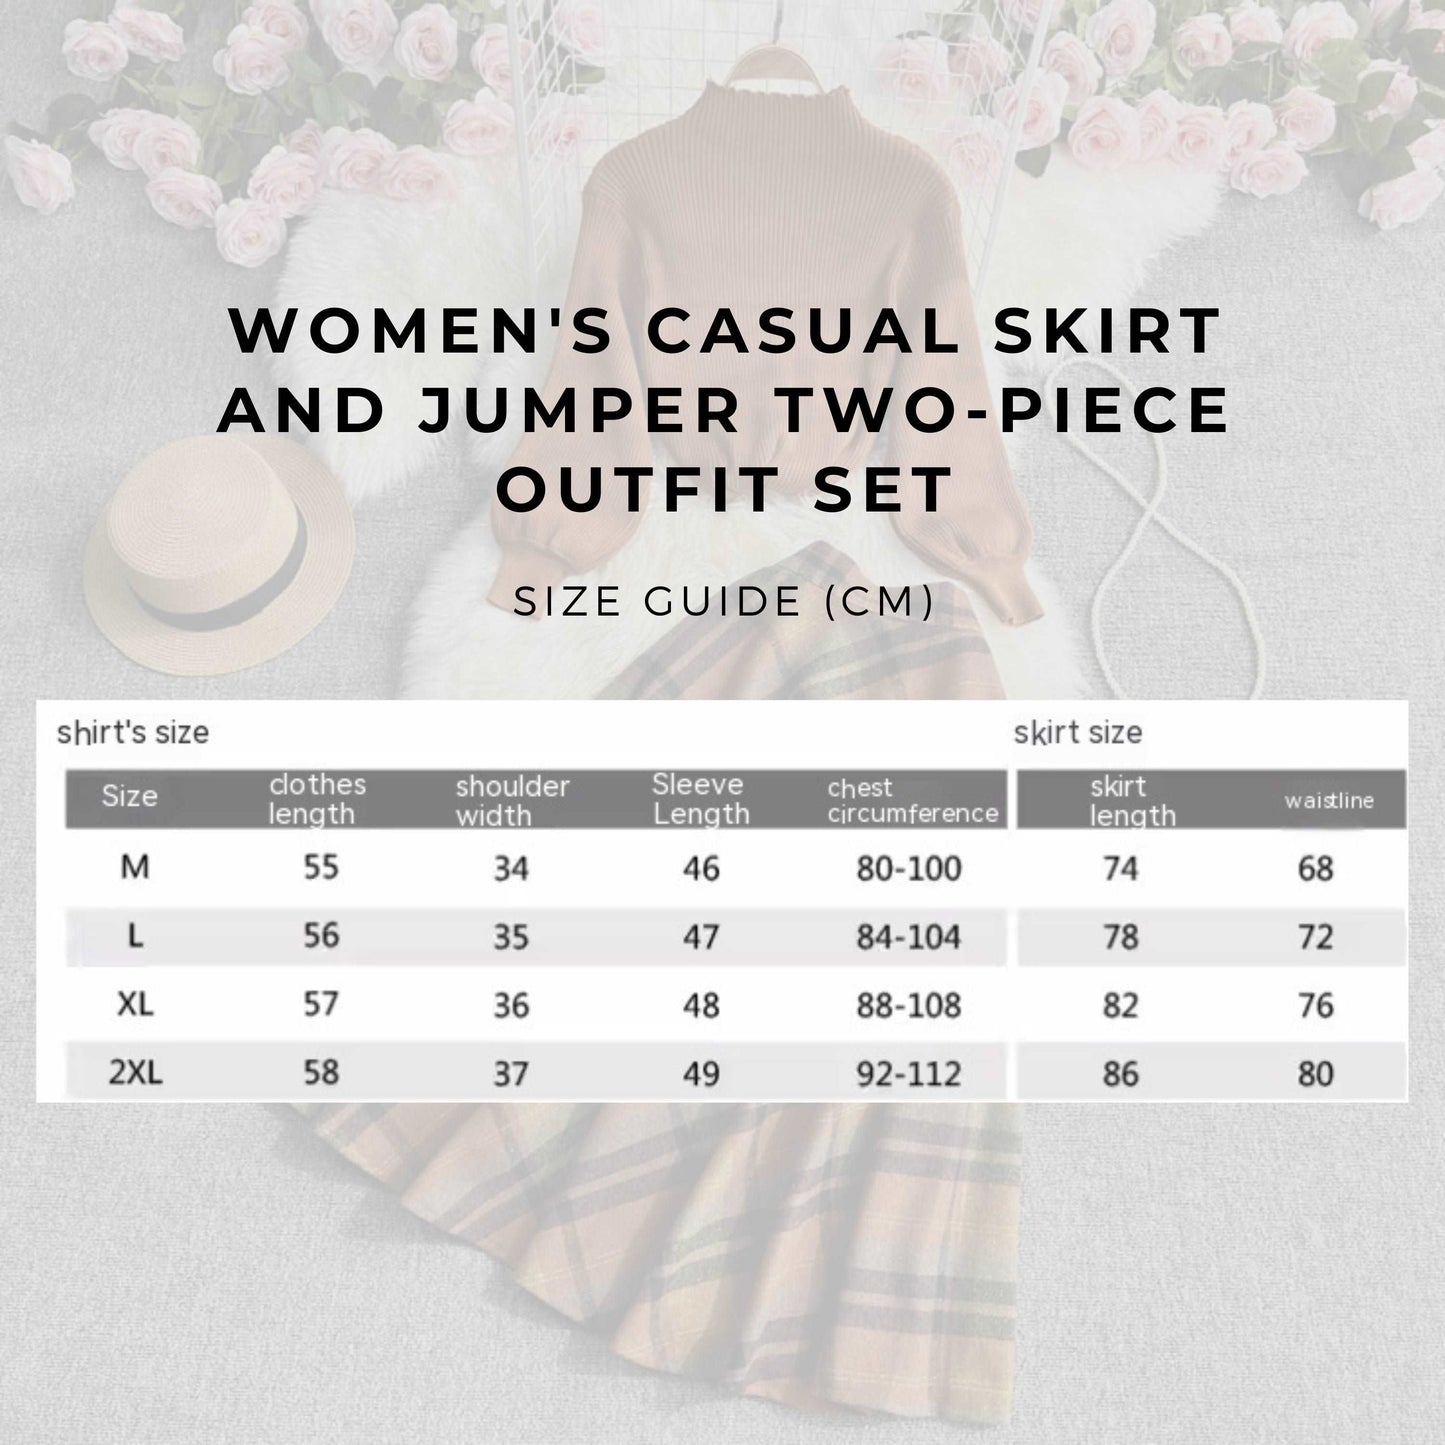 Women's Casual Skirt and Jumper Two-piece Outfit Set